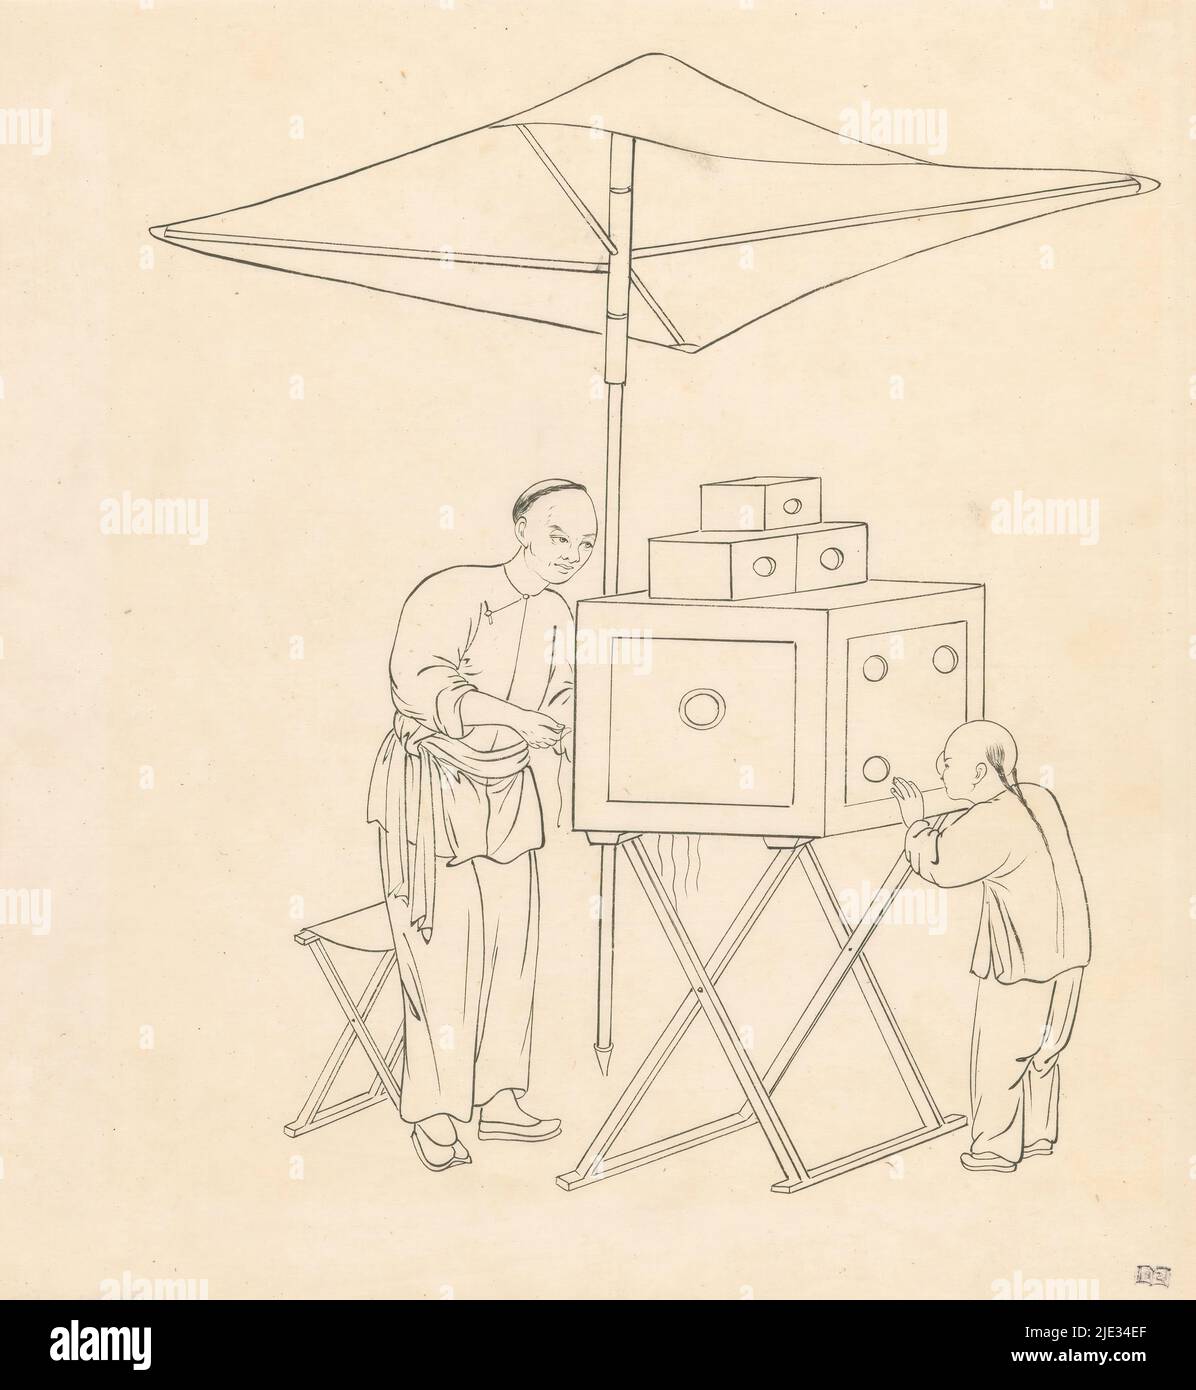 Chinese viewing box, Under a parasol stands a Chinese man with a viewing box, a boy looks through a window., print maker: anonymous, c. 1800 - c. 1899, China paper, height 291 mm × width 272 mm Stock Photo